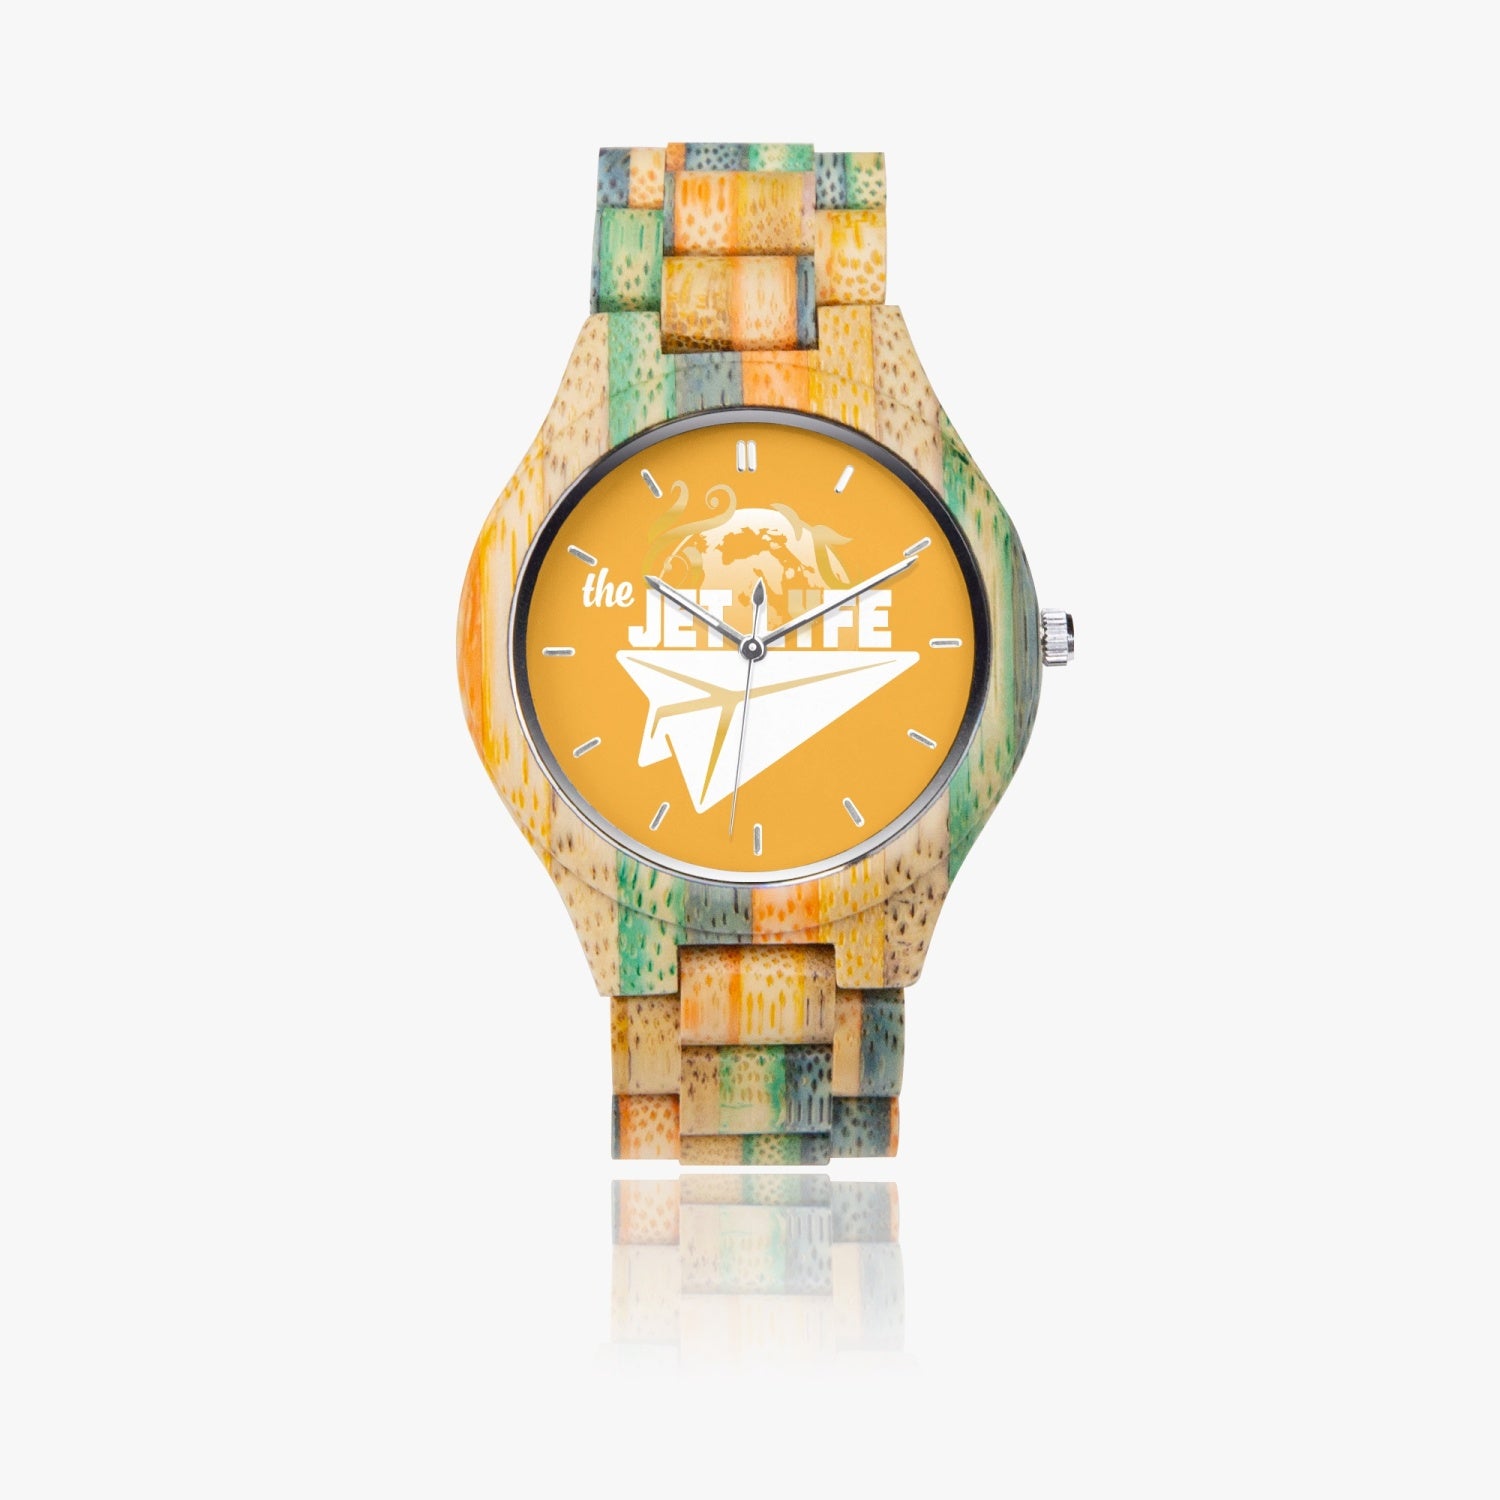 The JL Camouflage Wooden Watch